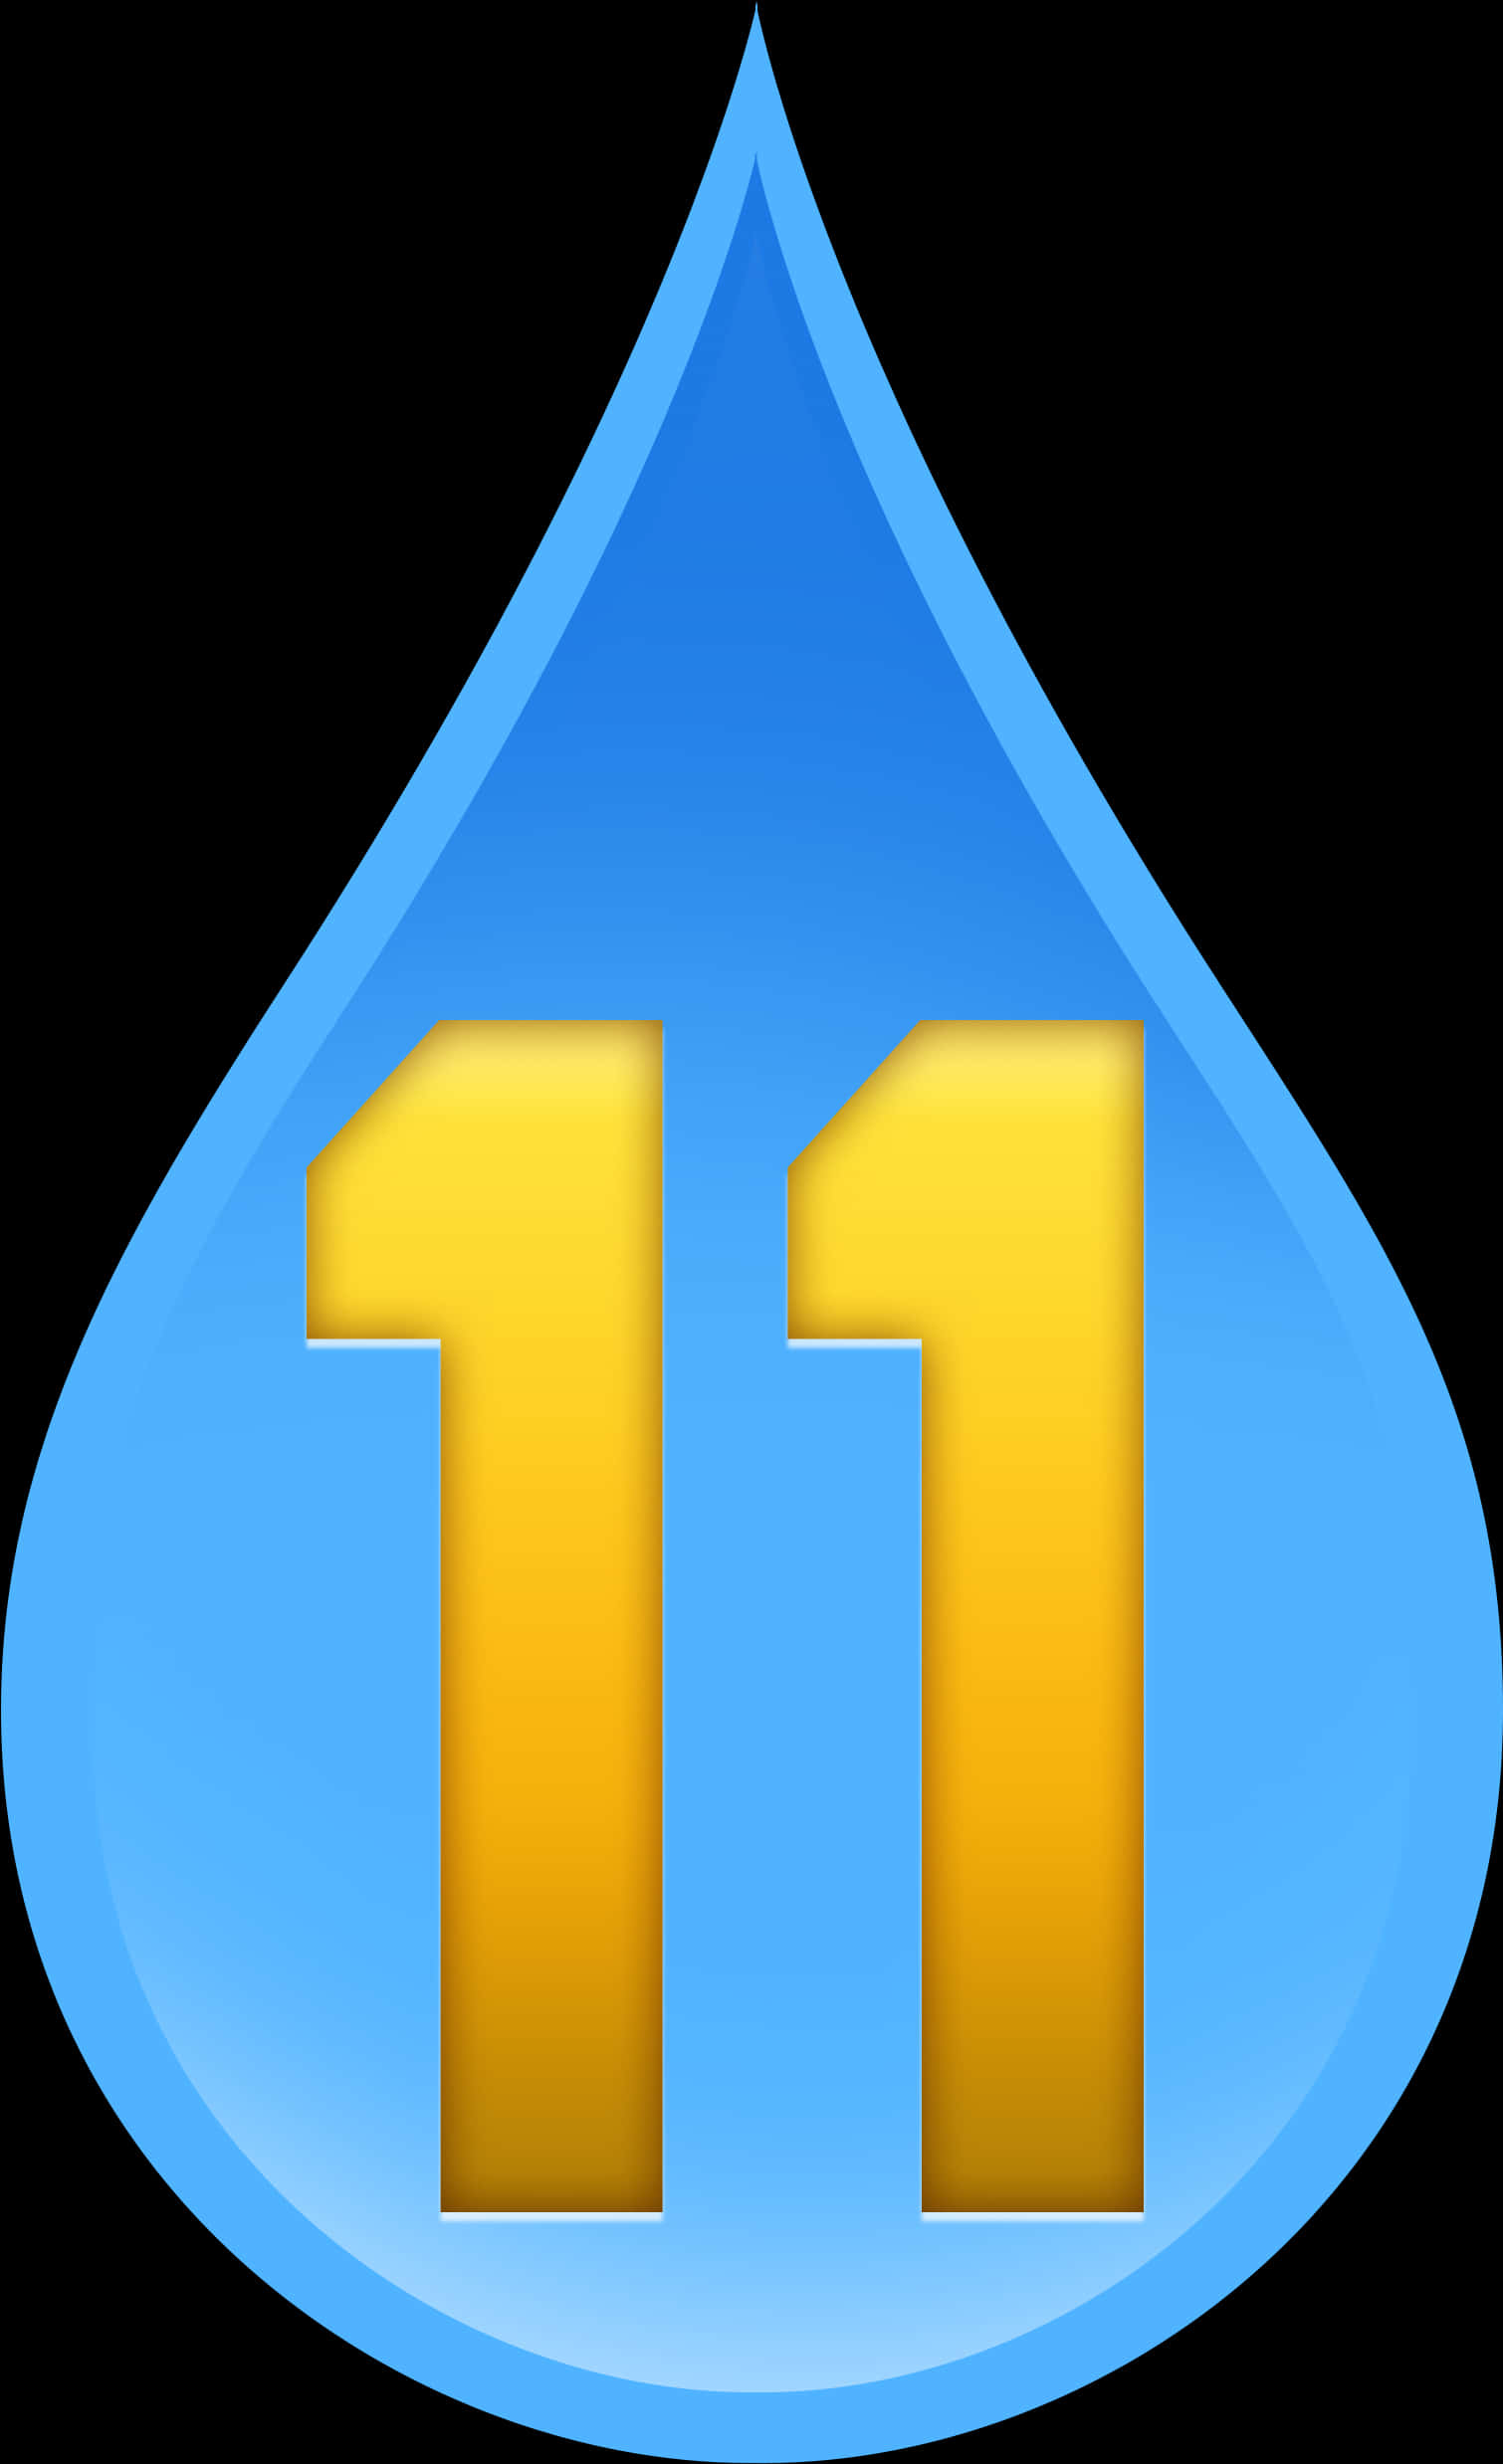 A Blue Drop Of Water With Yellow Numbers